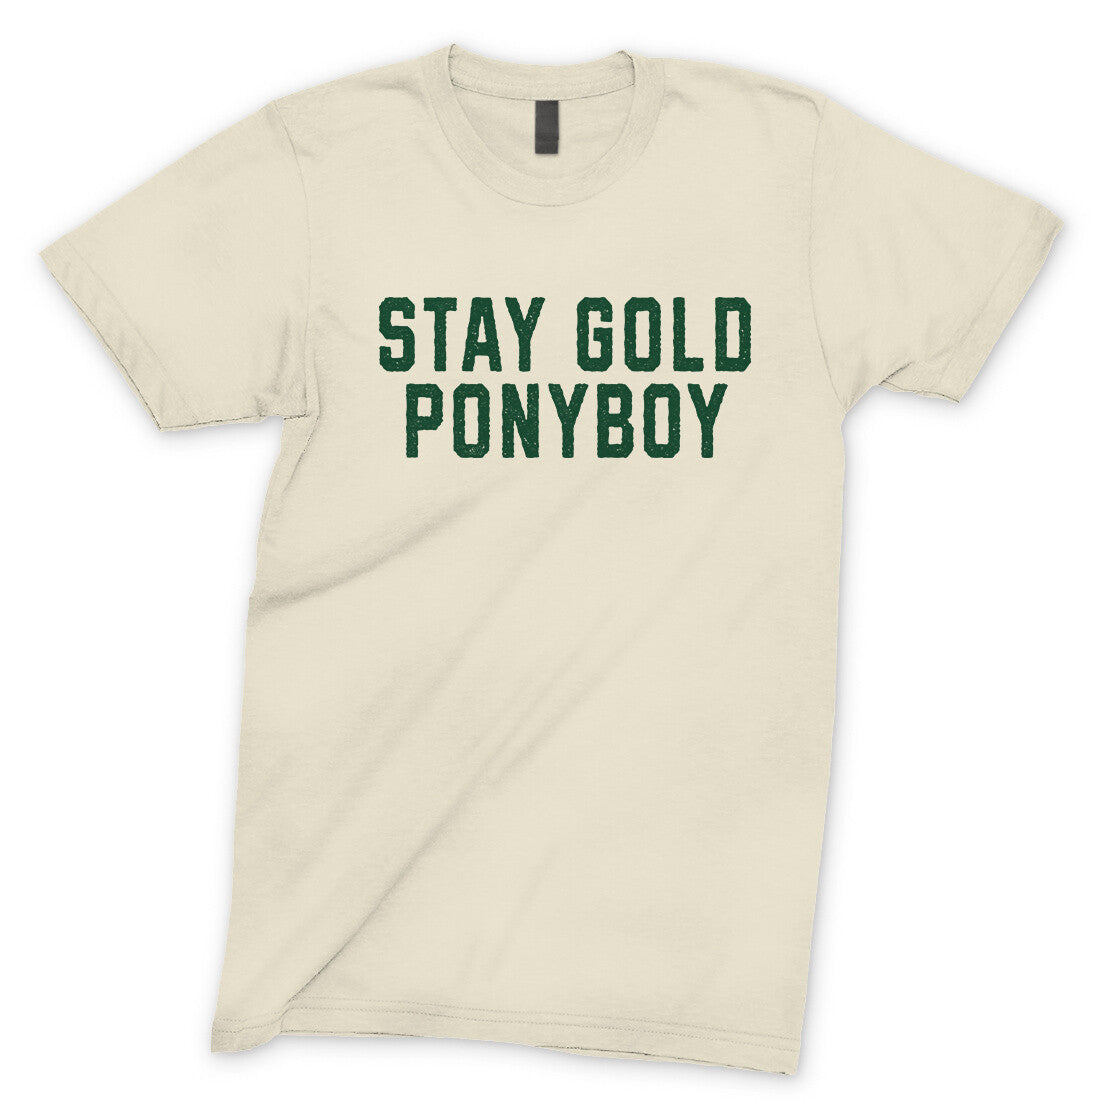 Stay Gold Ponyboy in Natural Color